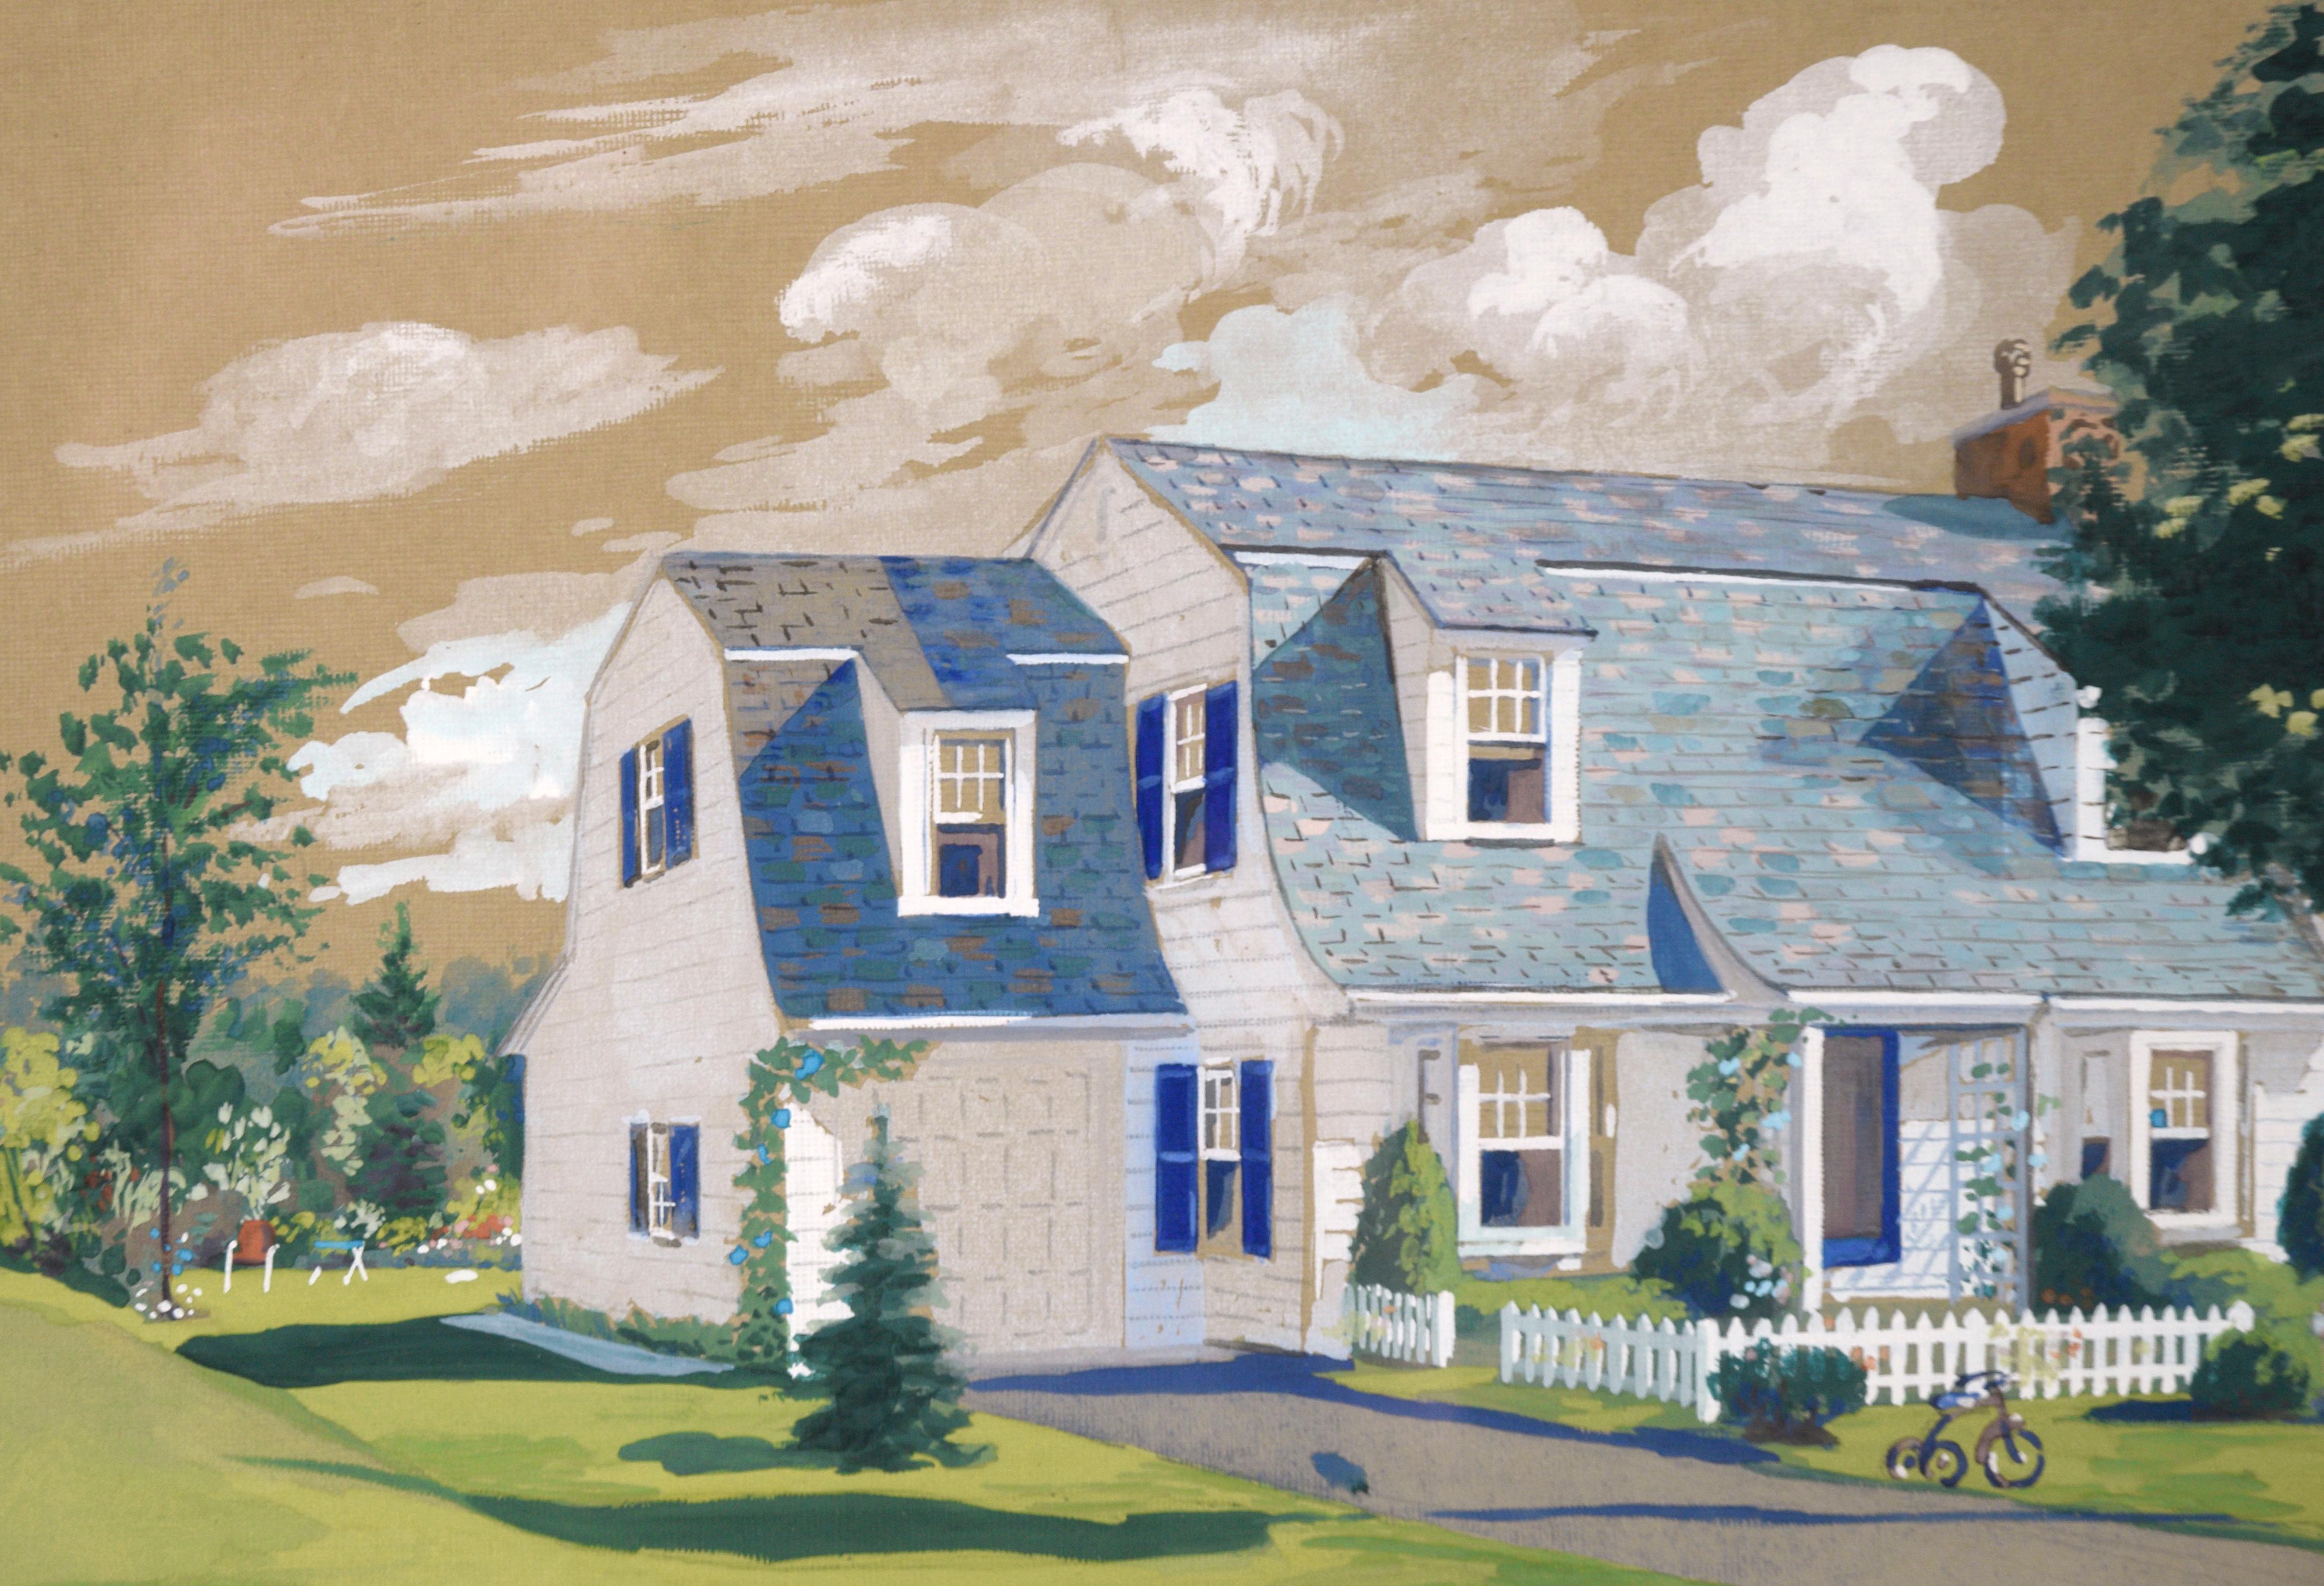 Architectural Illustration of Cape Cod Style Barn House with Dormers in Gouache  - Photorealist Art by F. Knowles